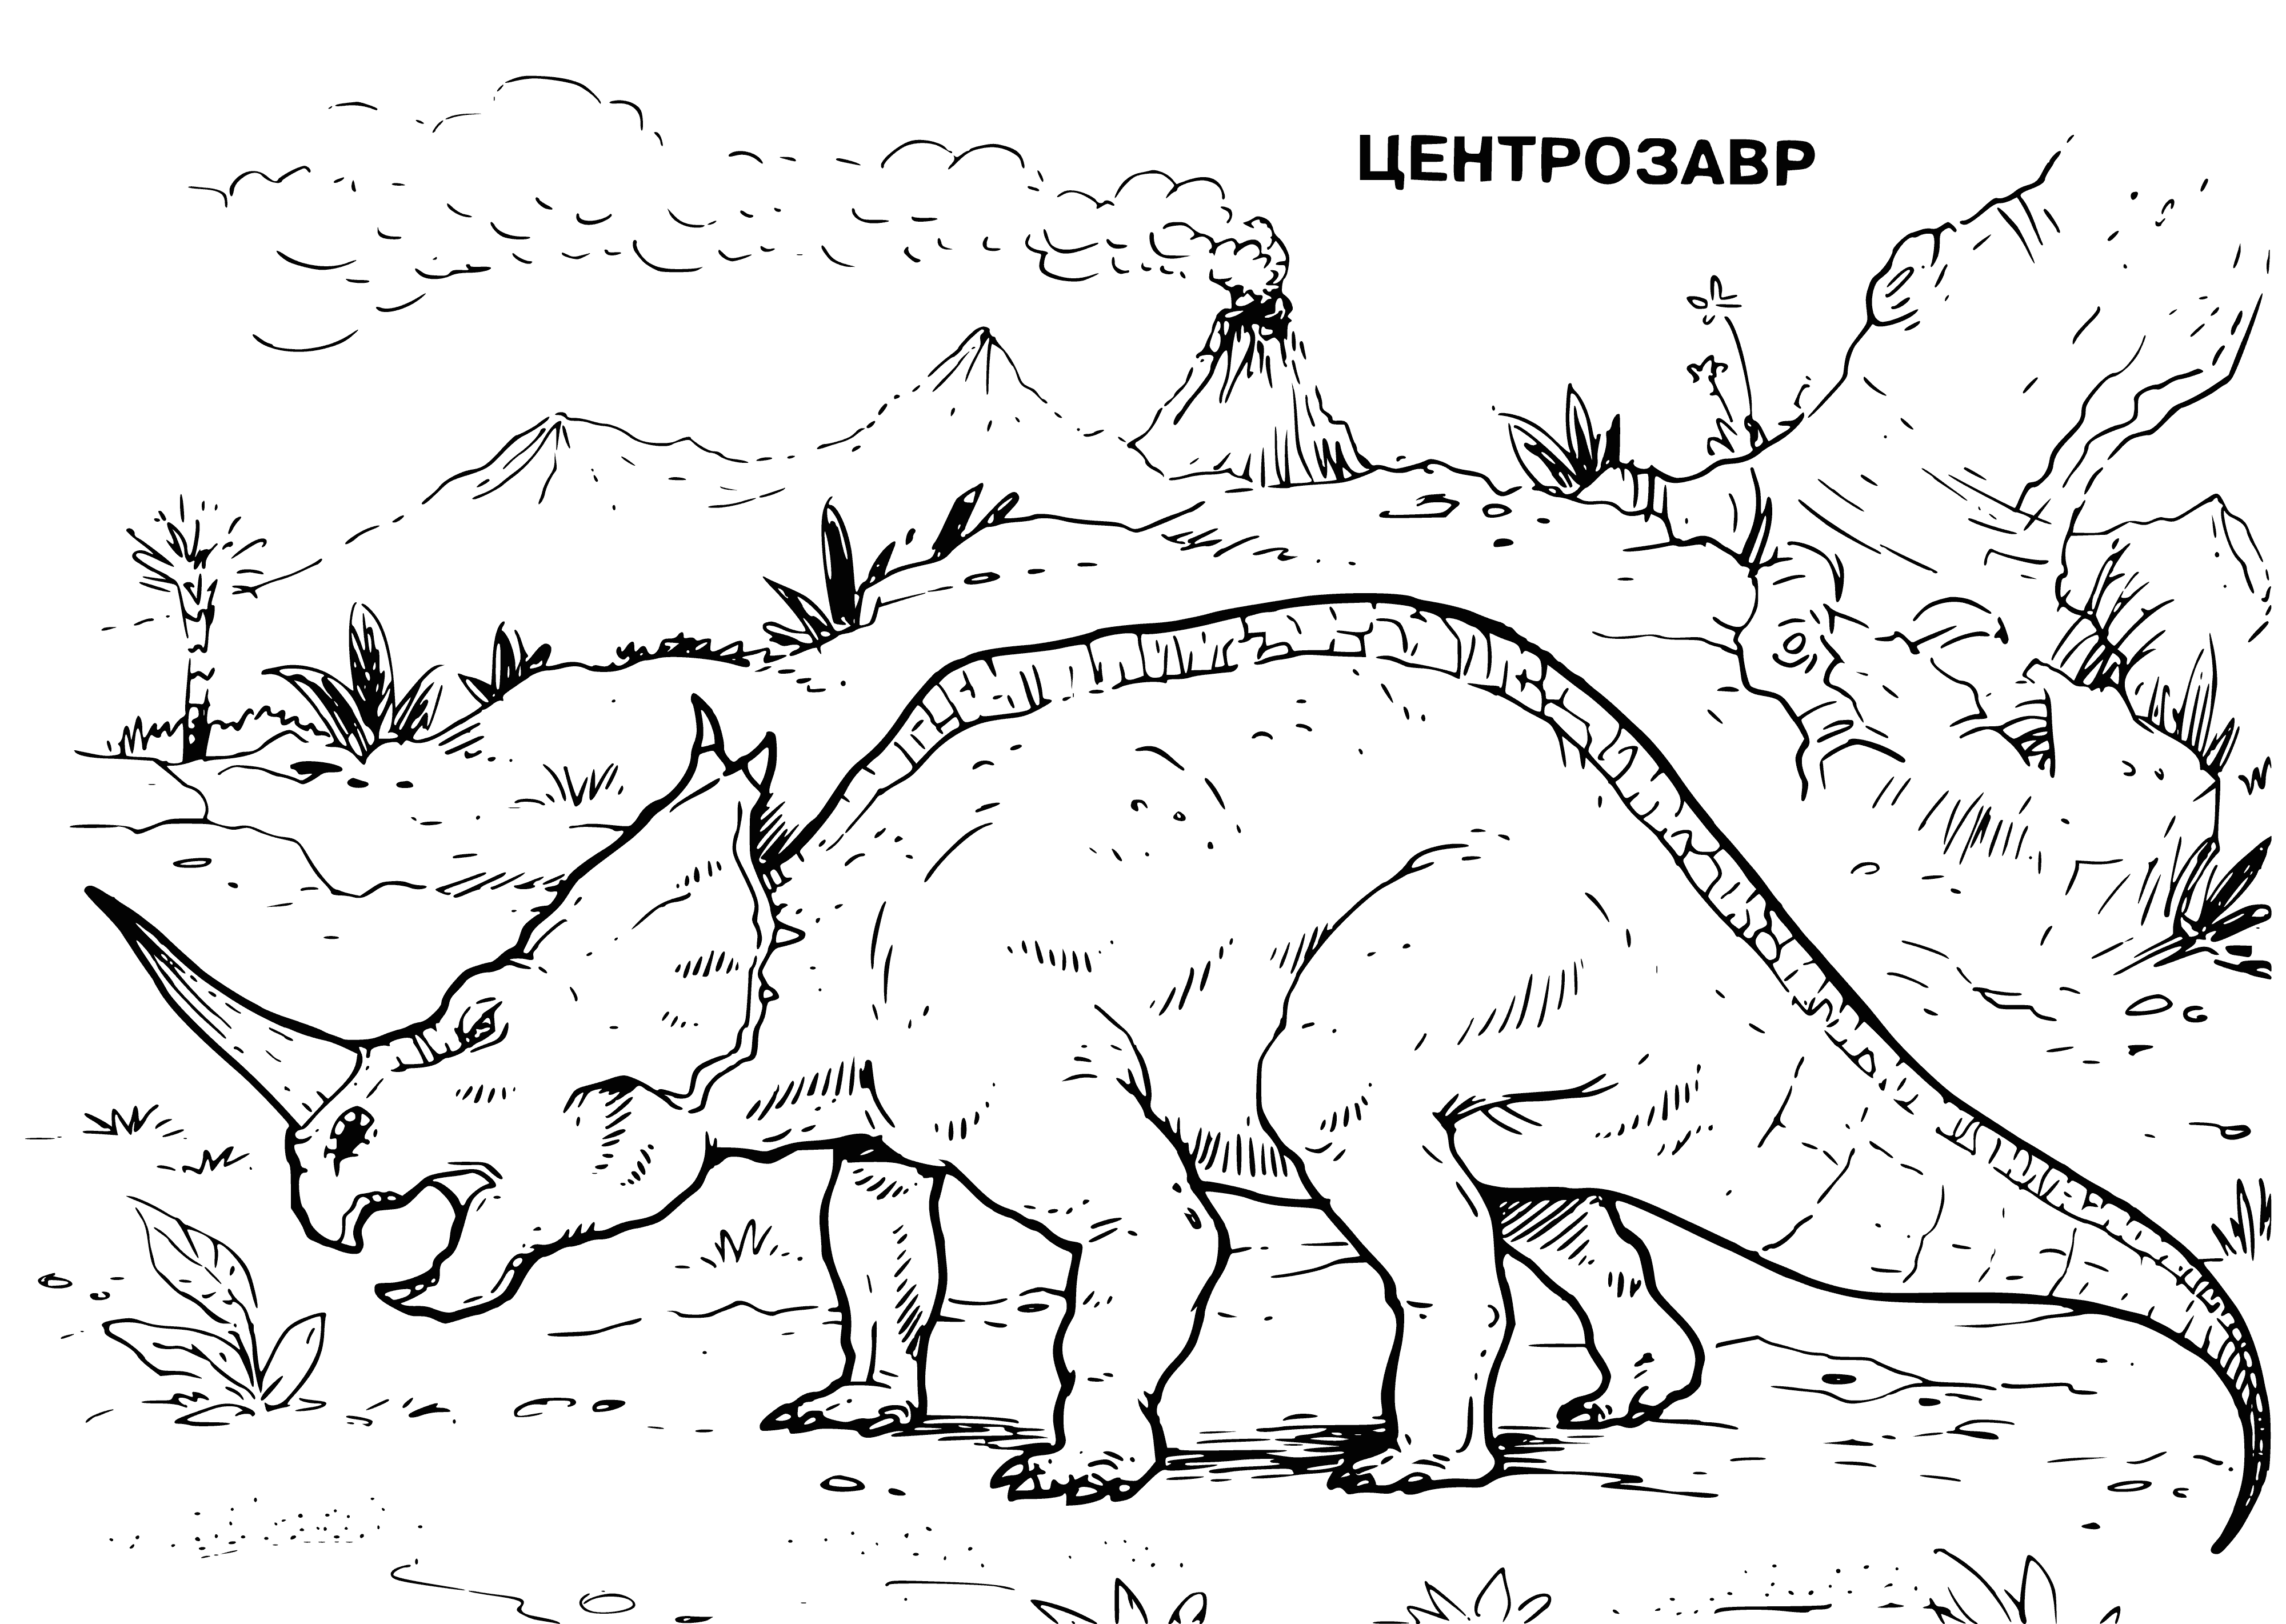 coloring page: Centrosaurus was a plant-eating dinosaur 18ft long and 2tons, with long neck/tail, horn on nose and horns on cheeks, small brain.